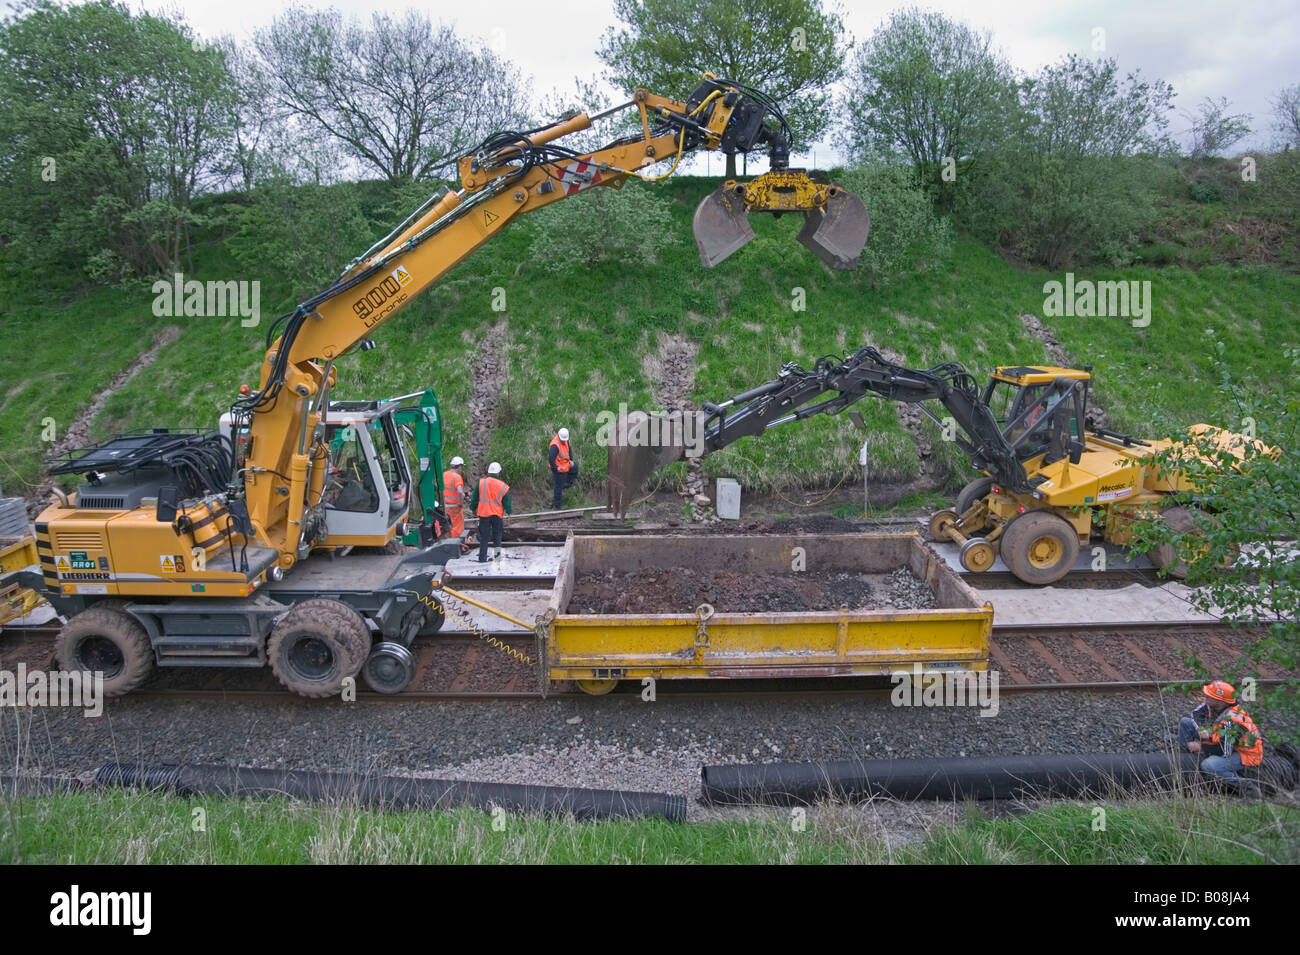 Specialist contractor using road-rail vehicles to excavate and replace outdated track drainage system on a busy rail network. Stock Photo